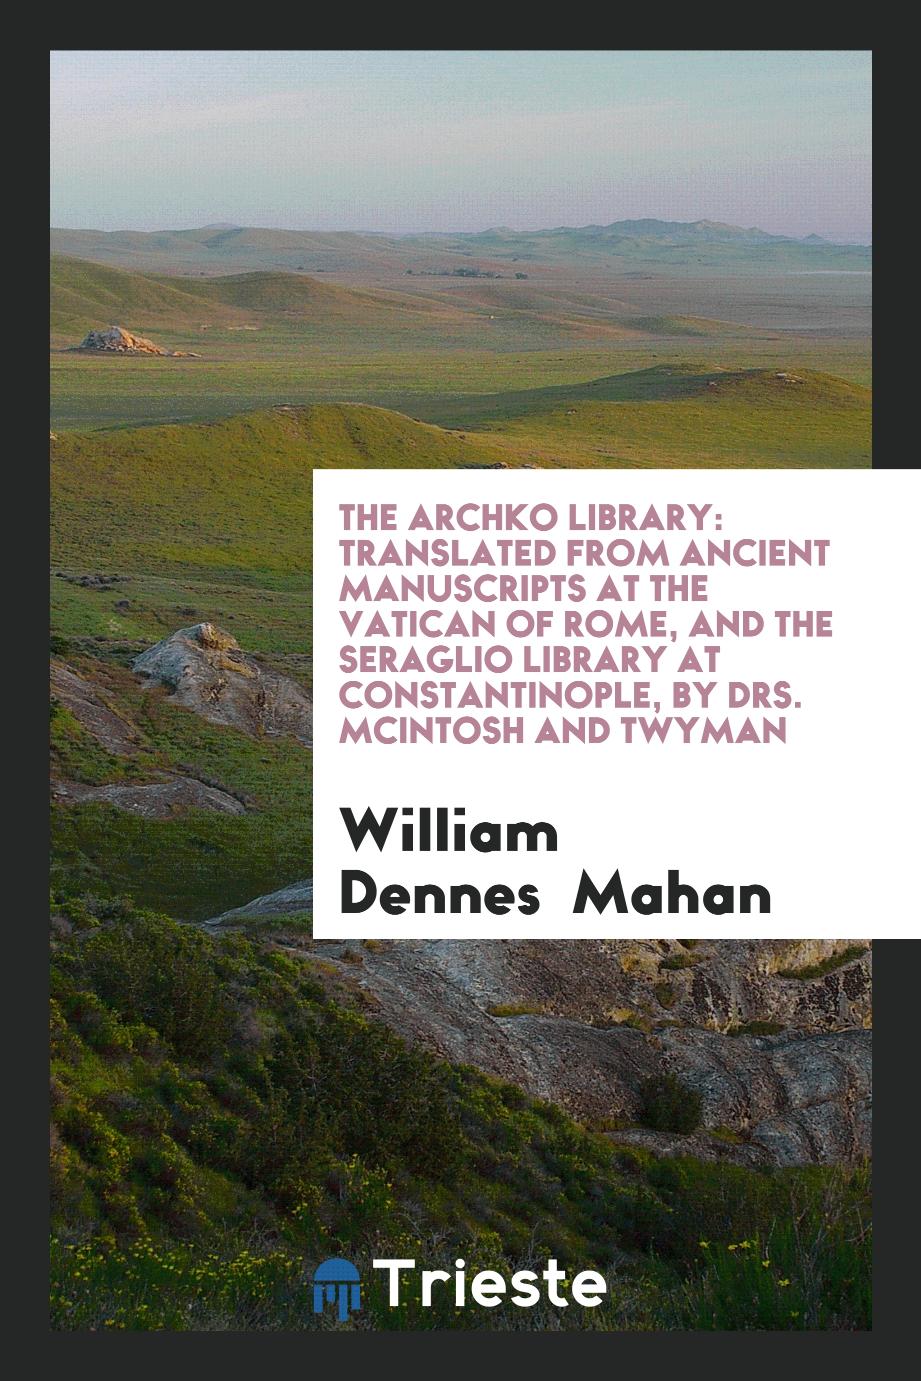 The Archko Library: Translated from Ancient Manuscripts at the Vatican of Rome, and the Seraglio Library at Constantinople, by Drs. McIntosh and Twyman